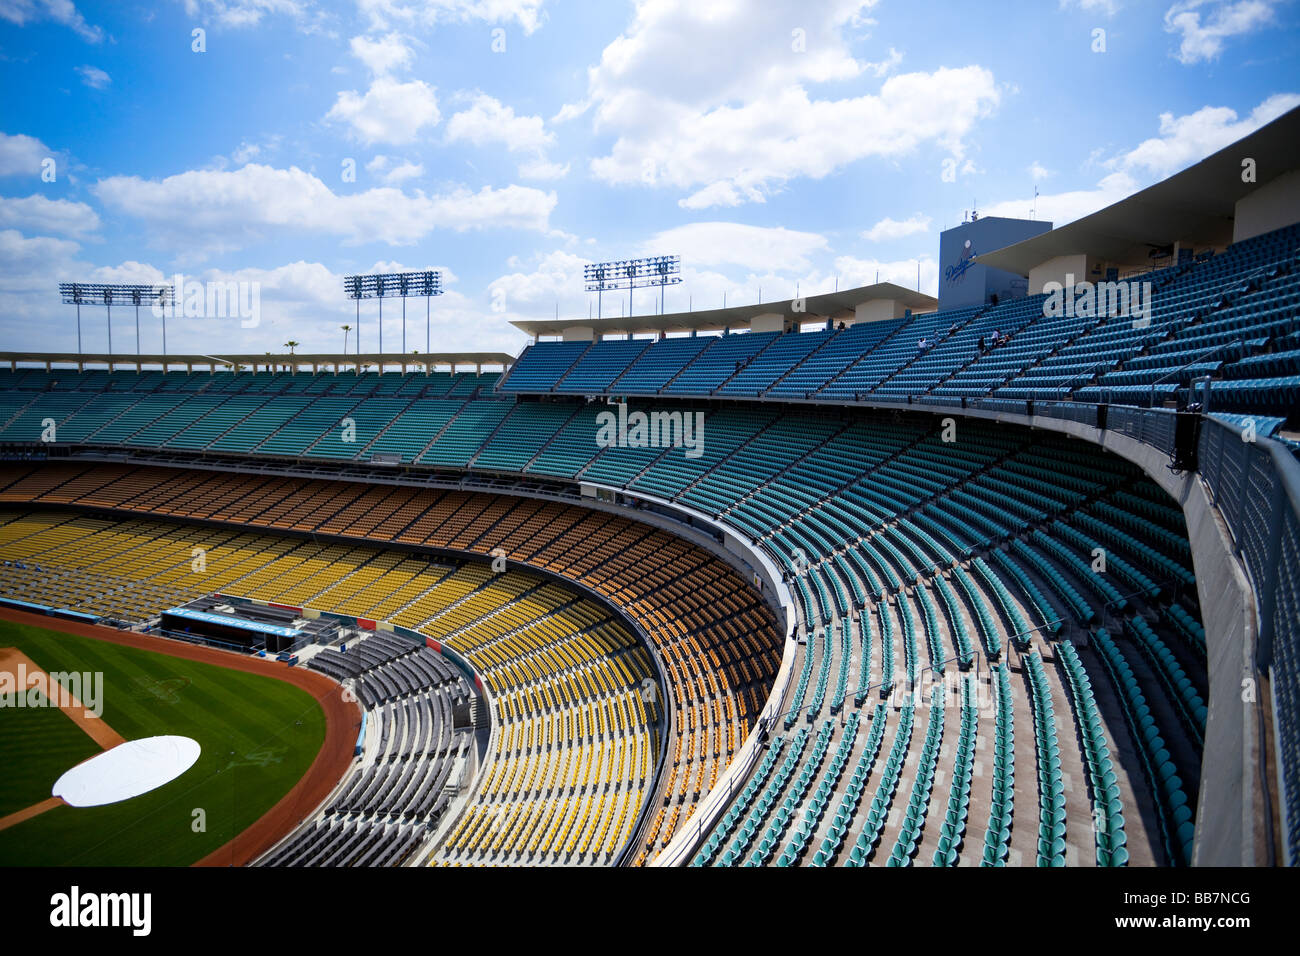 ROWS OF EMPTY BLEACHERS IN THE LOS ANGELES DODGERS STADIUM, CALIFORNIA, USA, North America Stock Photo